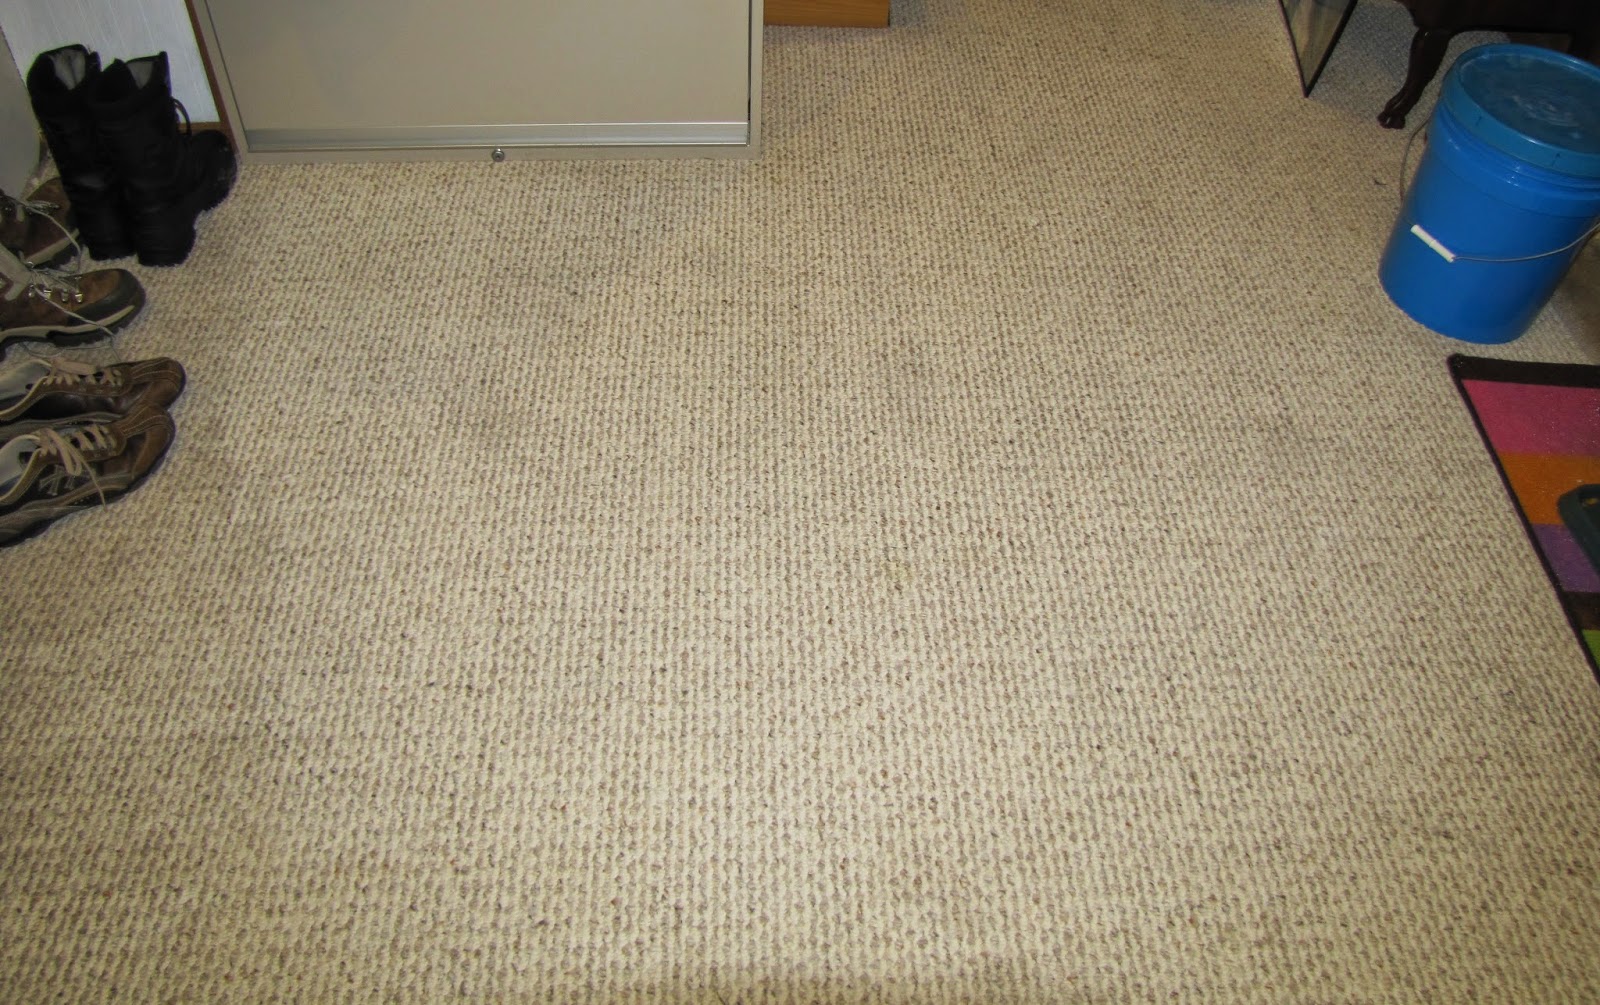 How To Remove Pet Stains And Odors From Carpet